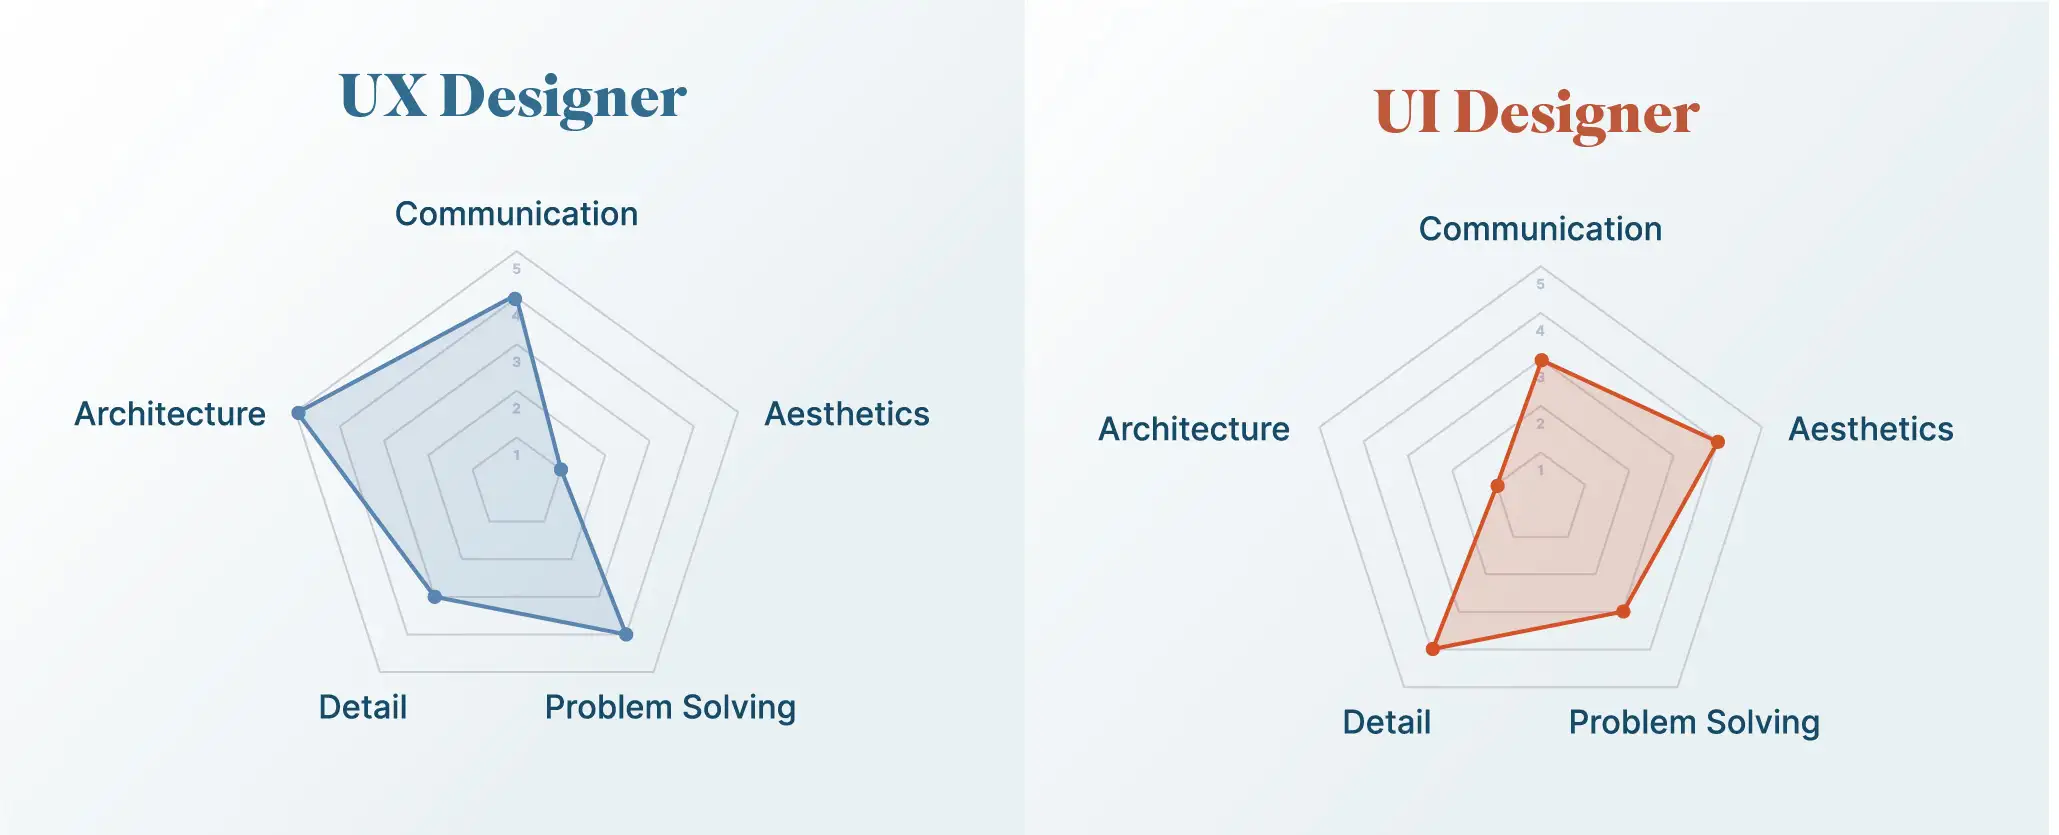 :desktop: The qualities and skills of UX Designers compared to those of a UI Designer using a 5 point graph.